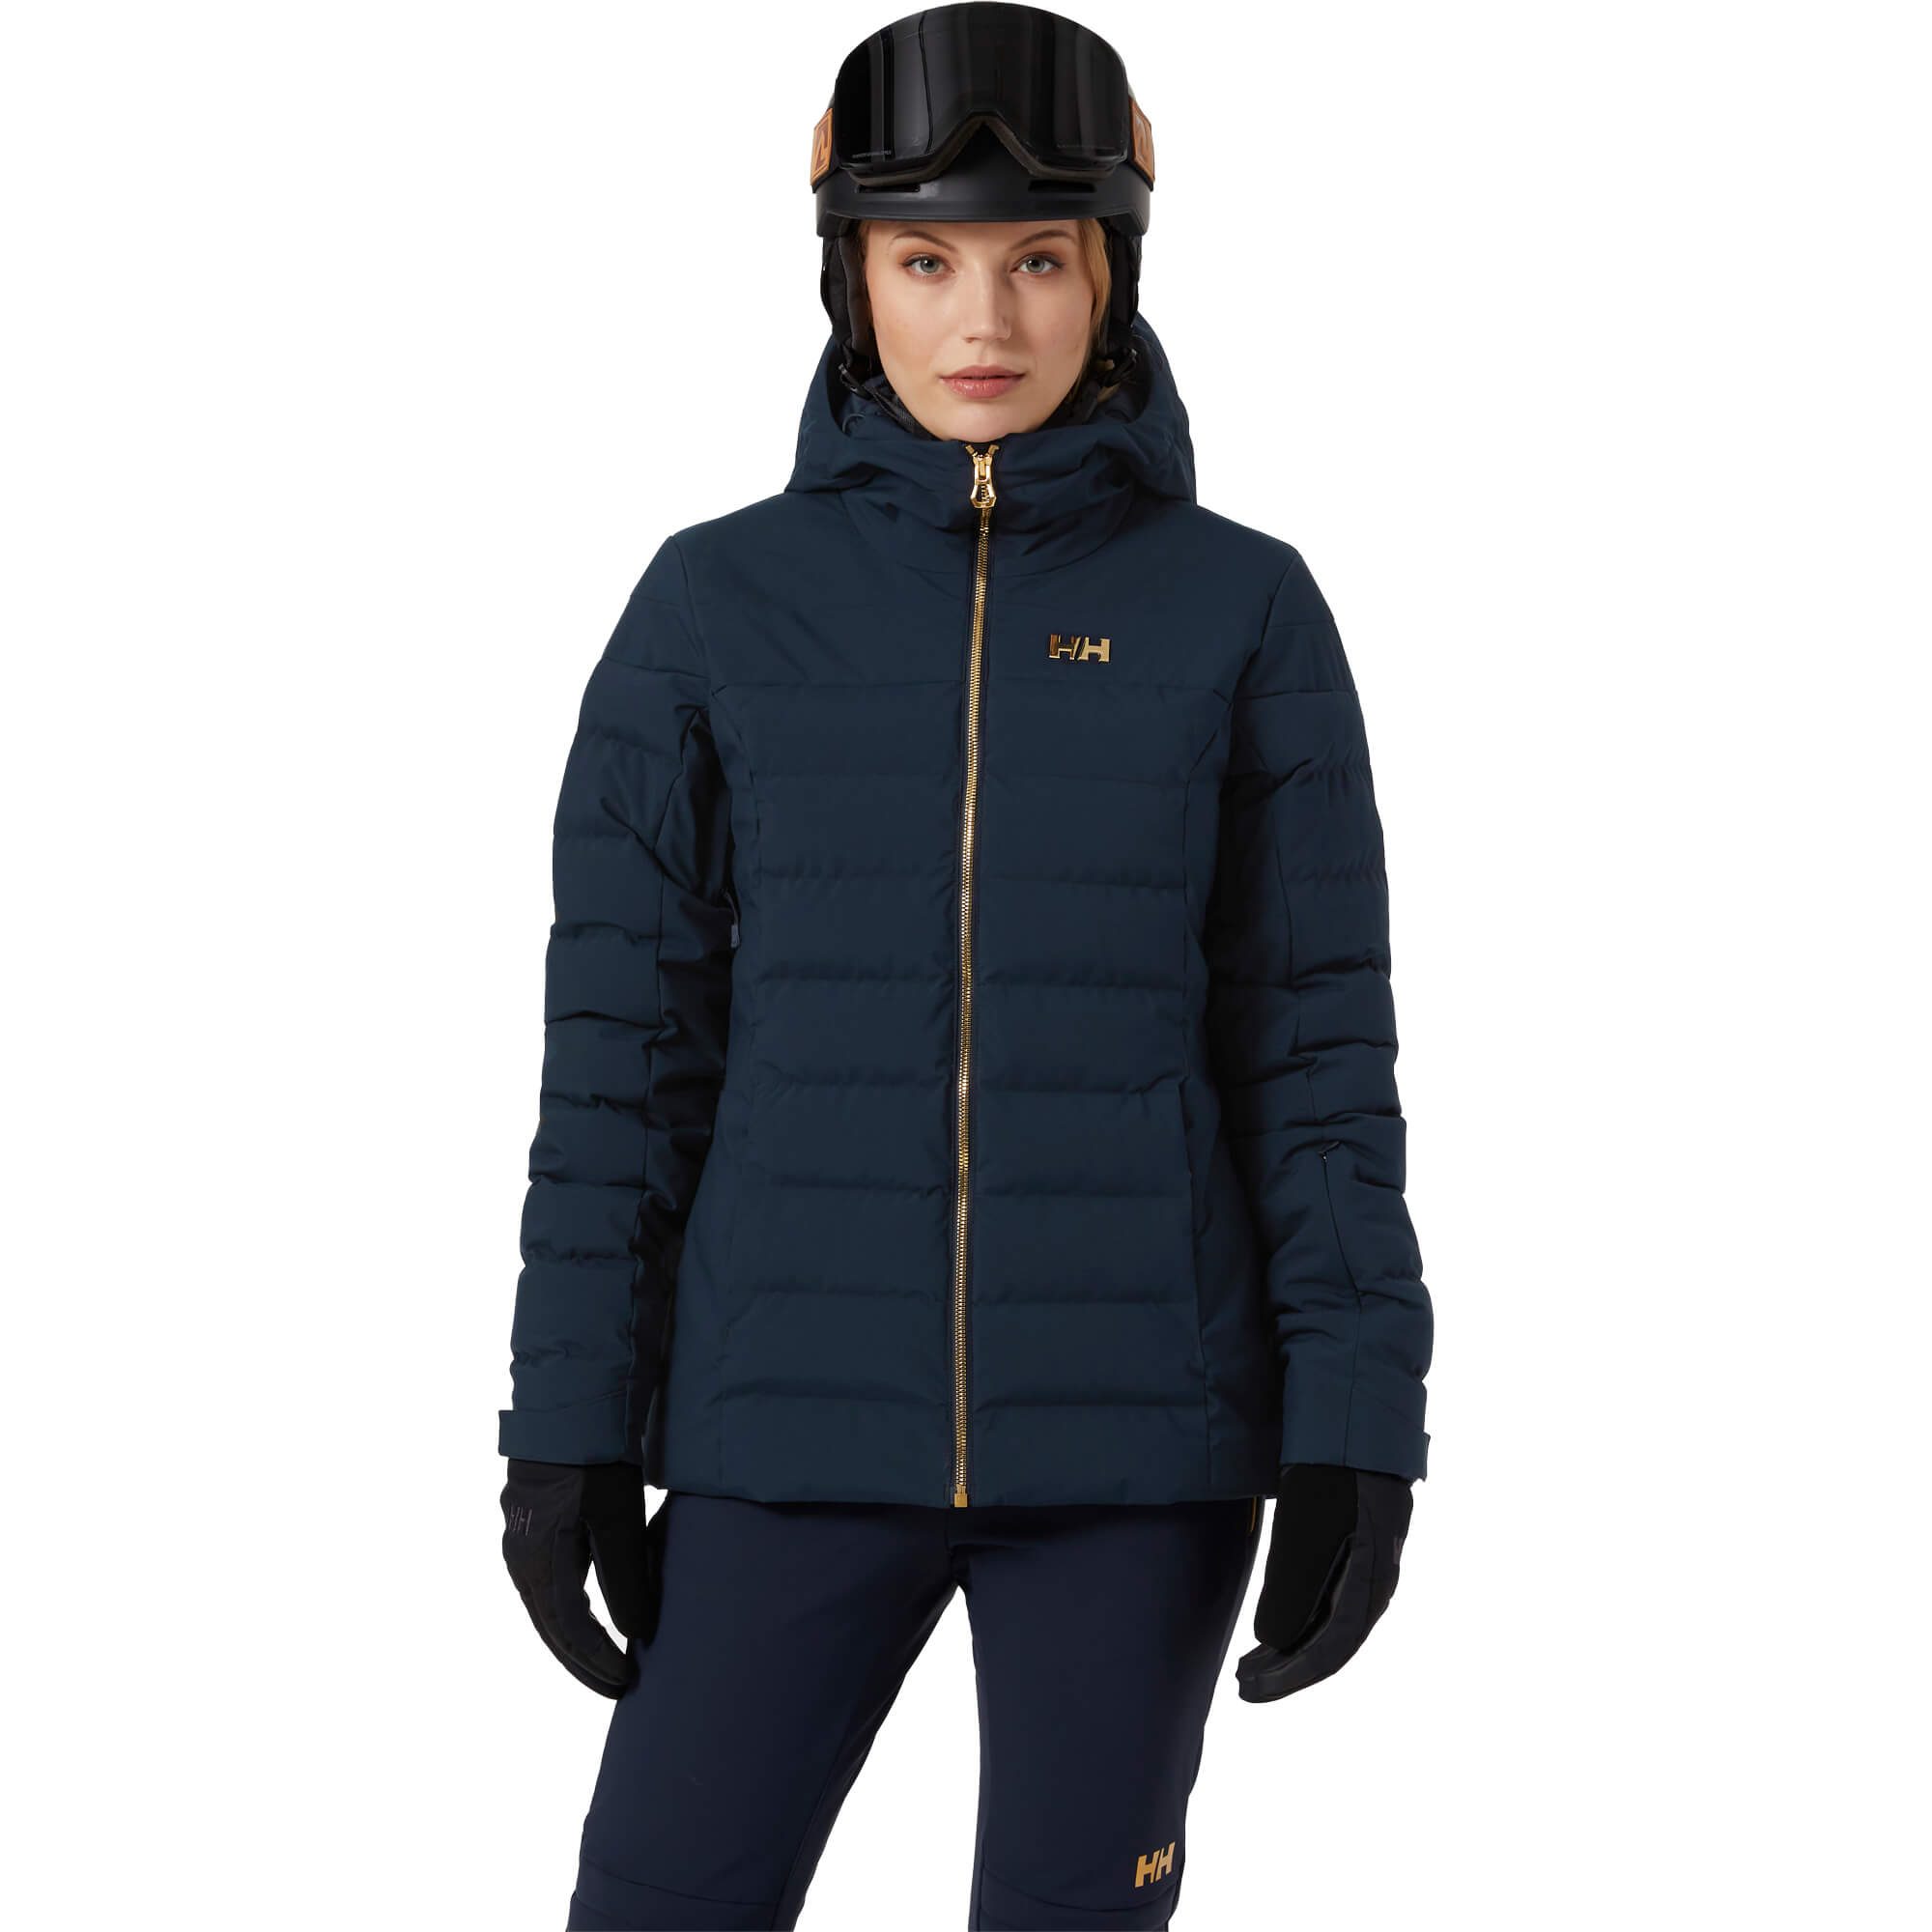 Helly Hansen Imperial Puffy Women's Insulated Ski Jacket